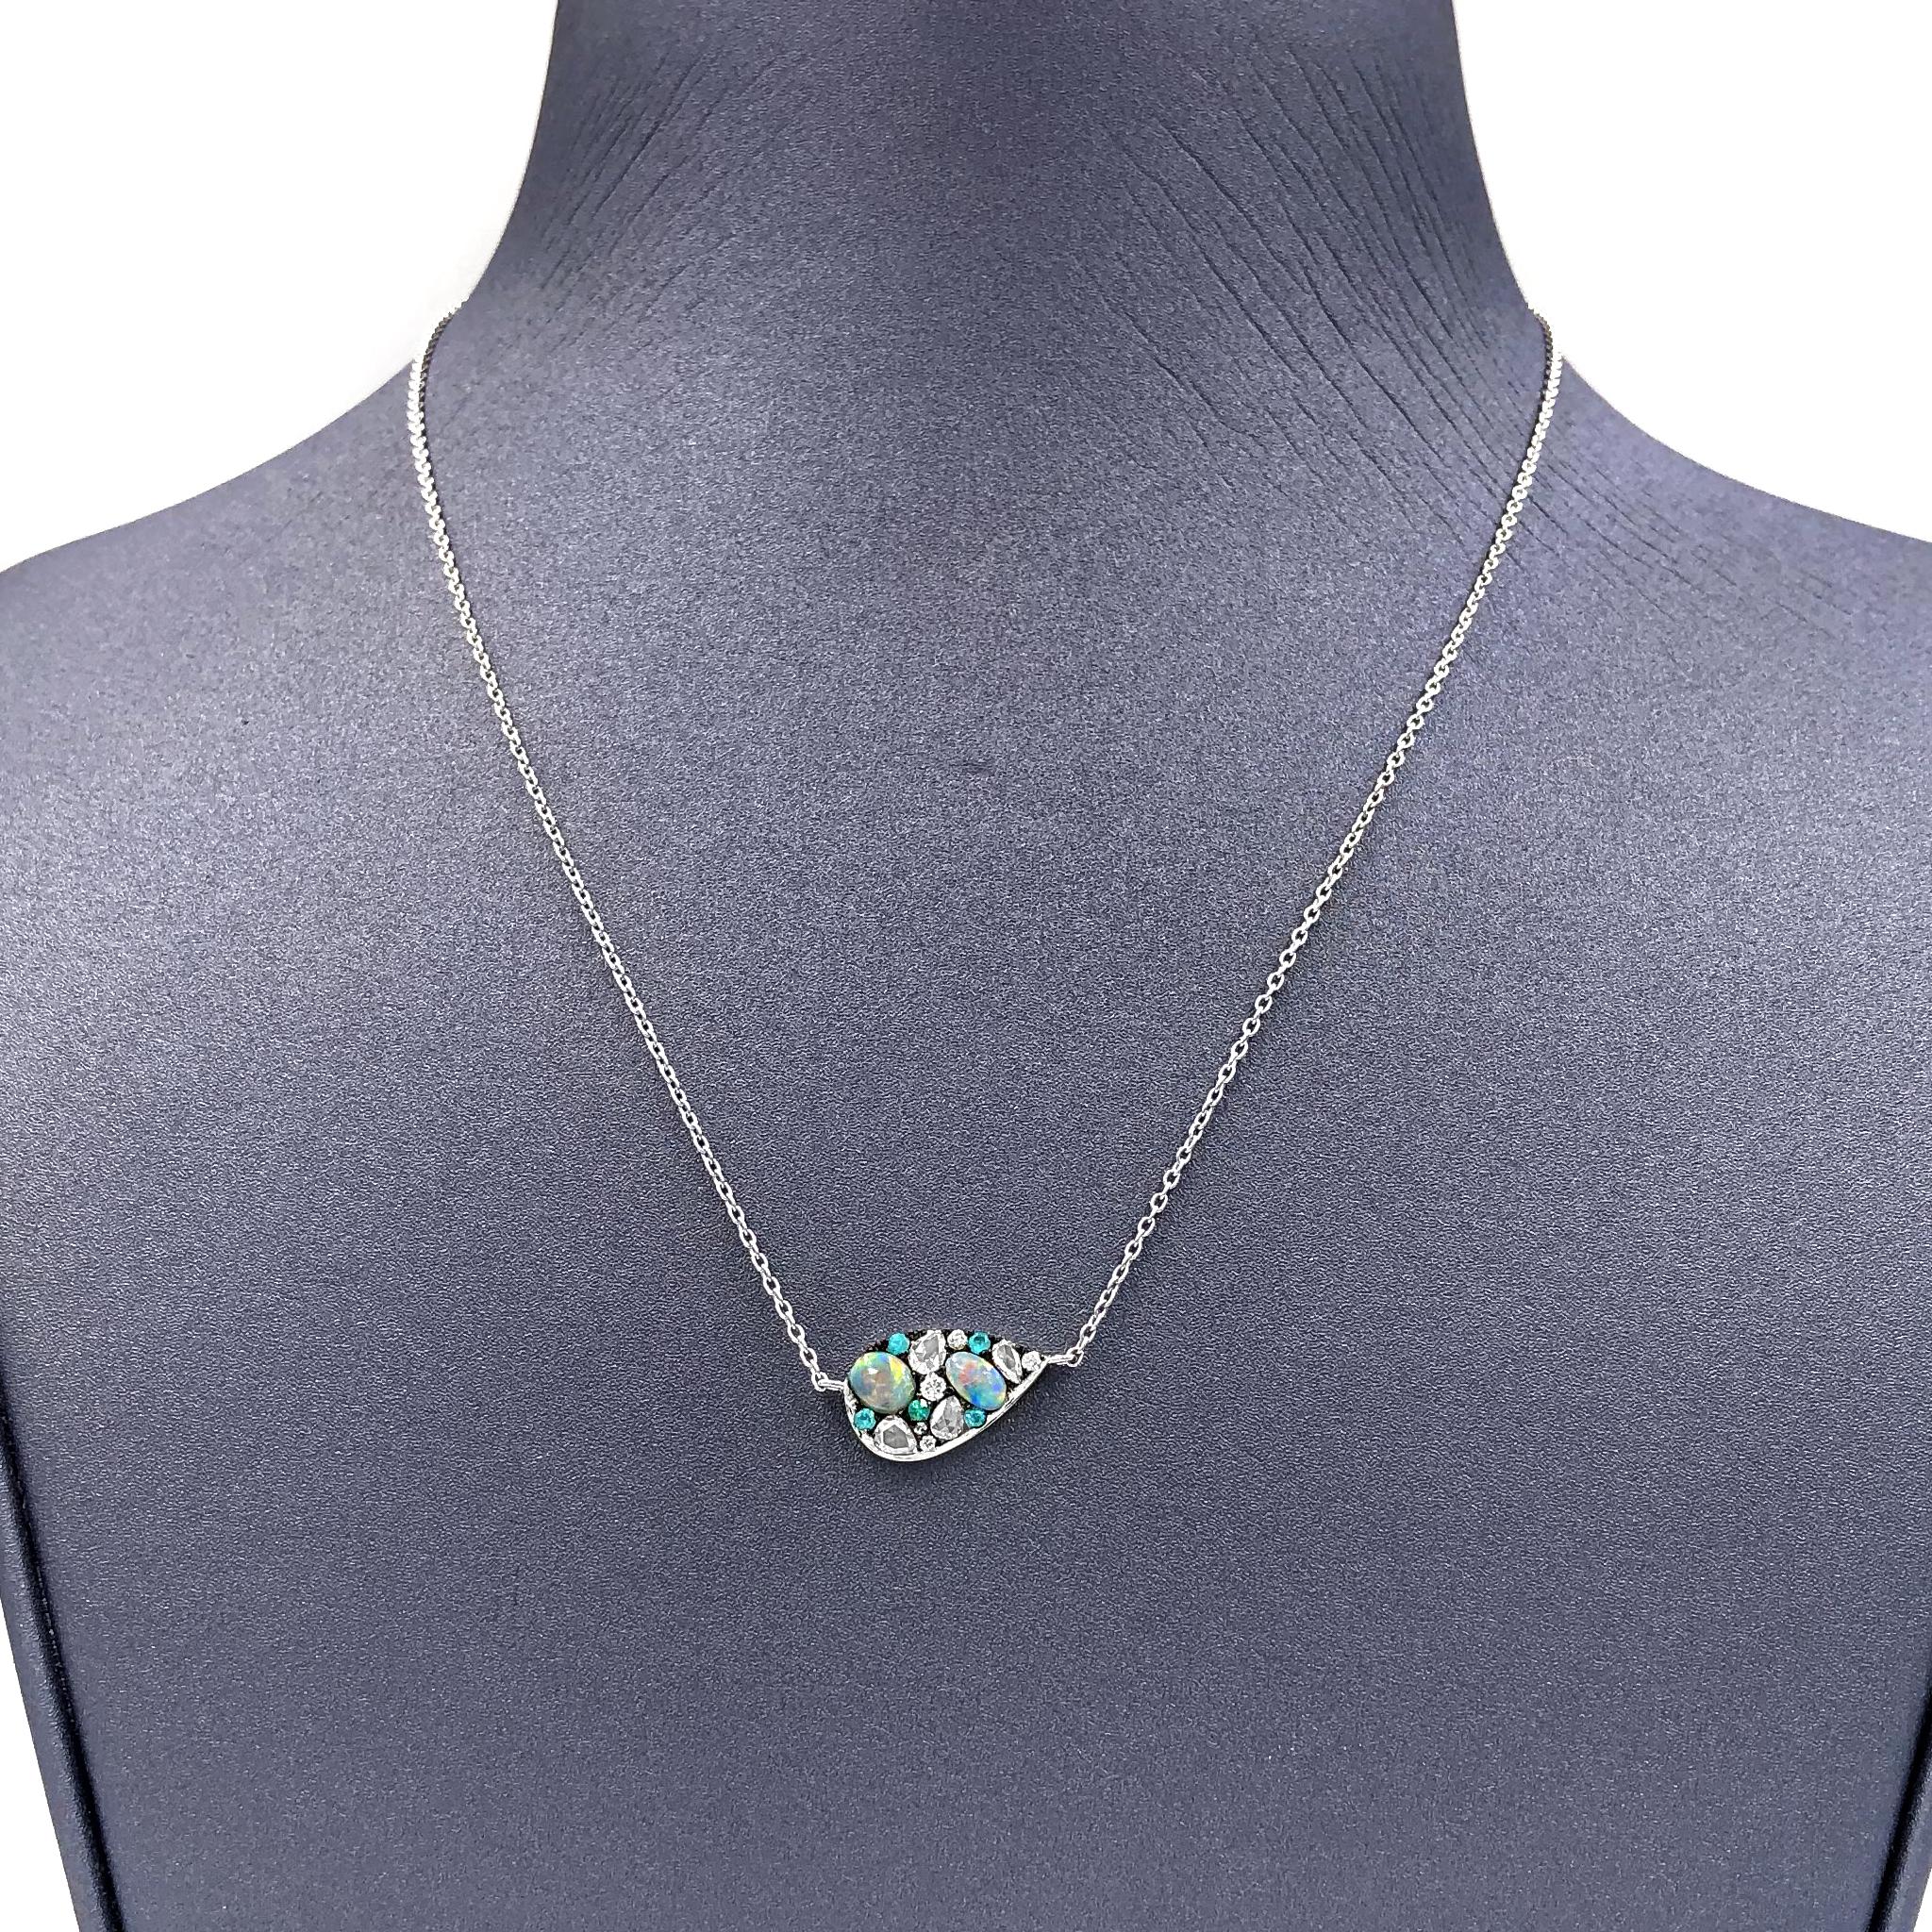 One of a Kind Floating Starstruck Necklace handmade in Belgium by jewelry artist Joke Quick in high-polished 18k white gold featuring with 0.46 total carats of Australian Lightning Ridge black opal, Paraiba tourmaline totaling 0.07 carats, 0.07